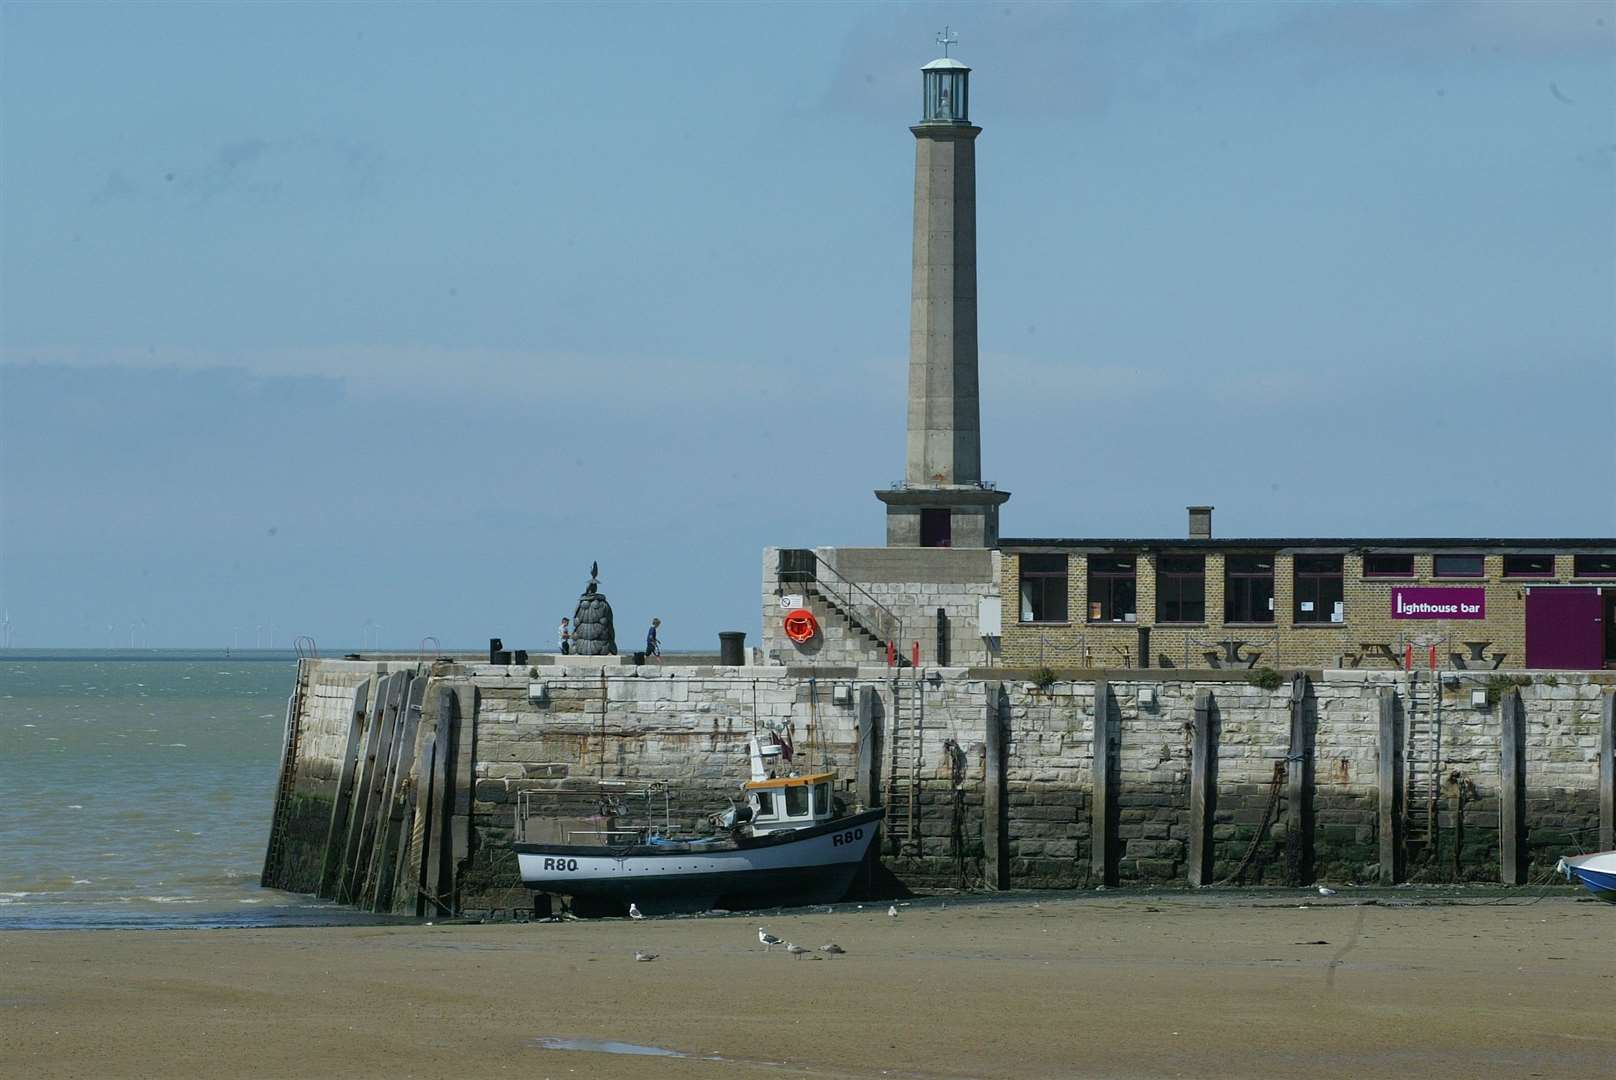 The Harbour Arm in Margate